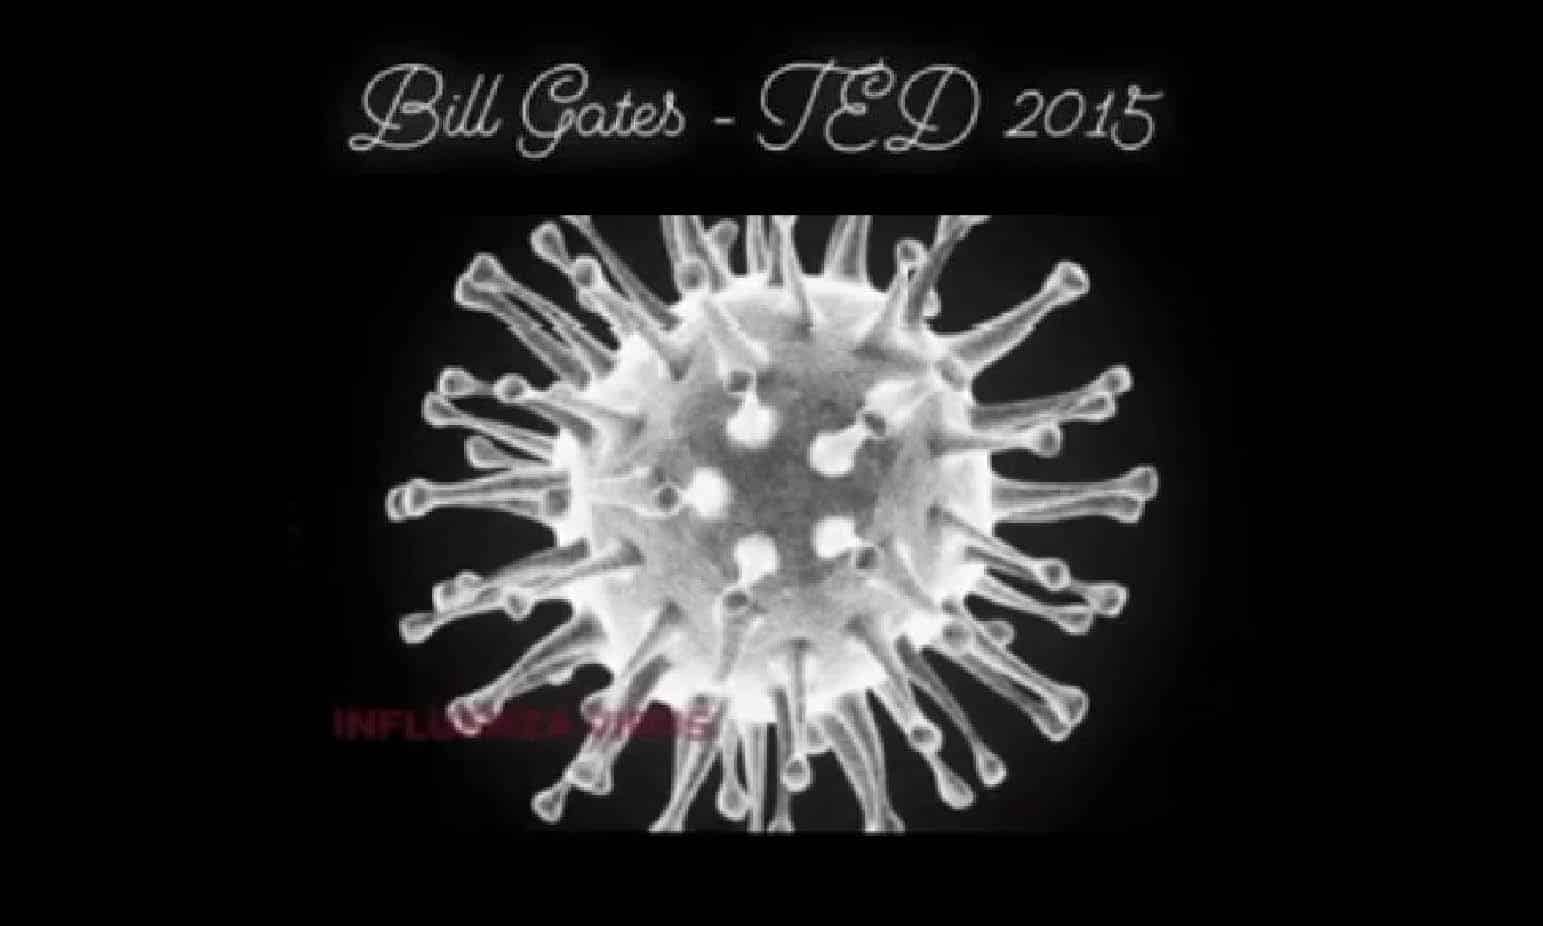 COVID-19 PANDEMIC Predicted in Bill Gates forum in…2015 with ex-CIA….